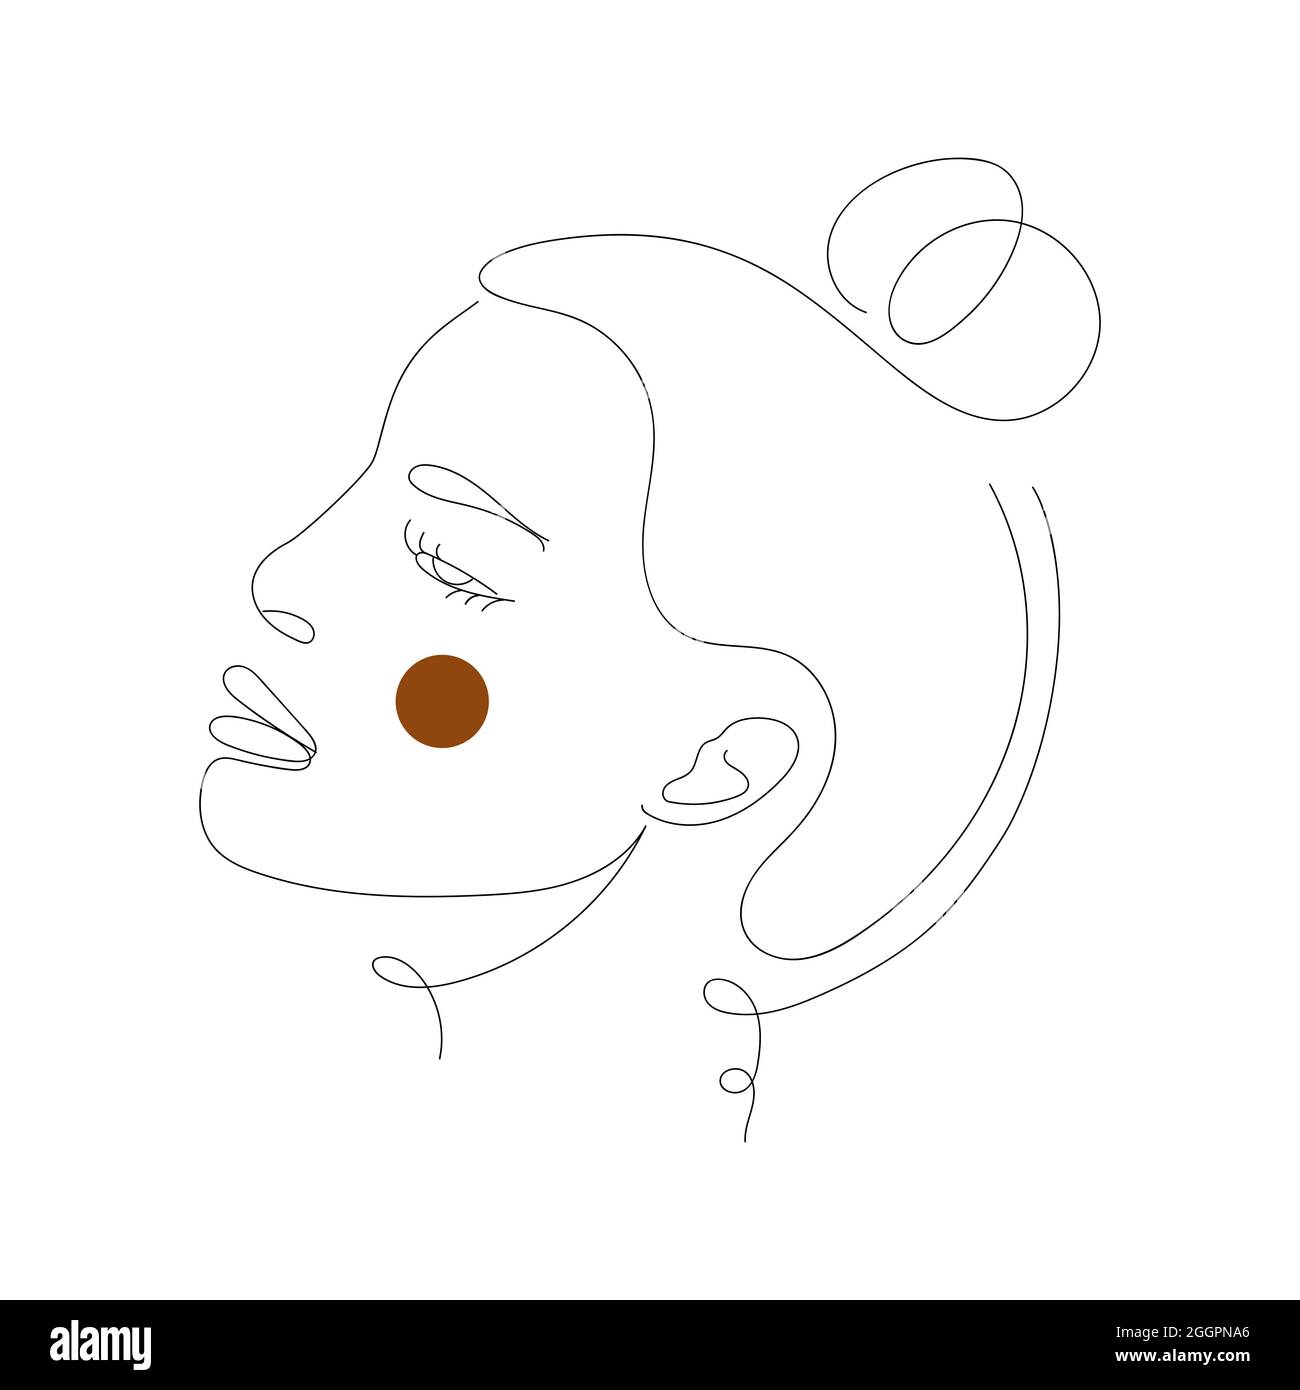 American woman with calm face. Face line art. Vector illustration of a female profile with a brown blush. Stock Vector